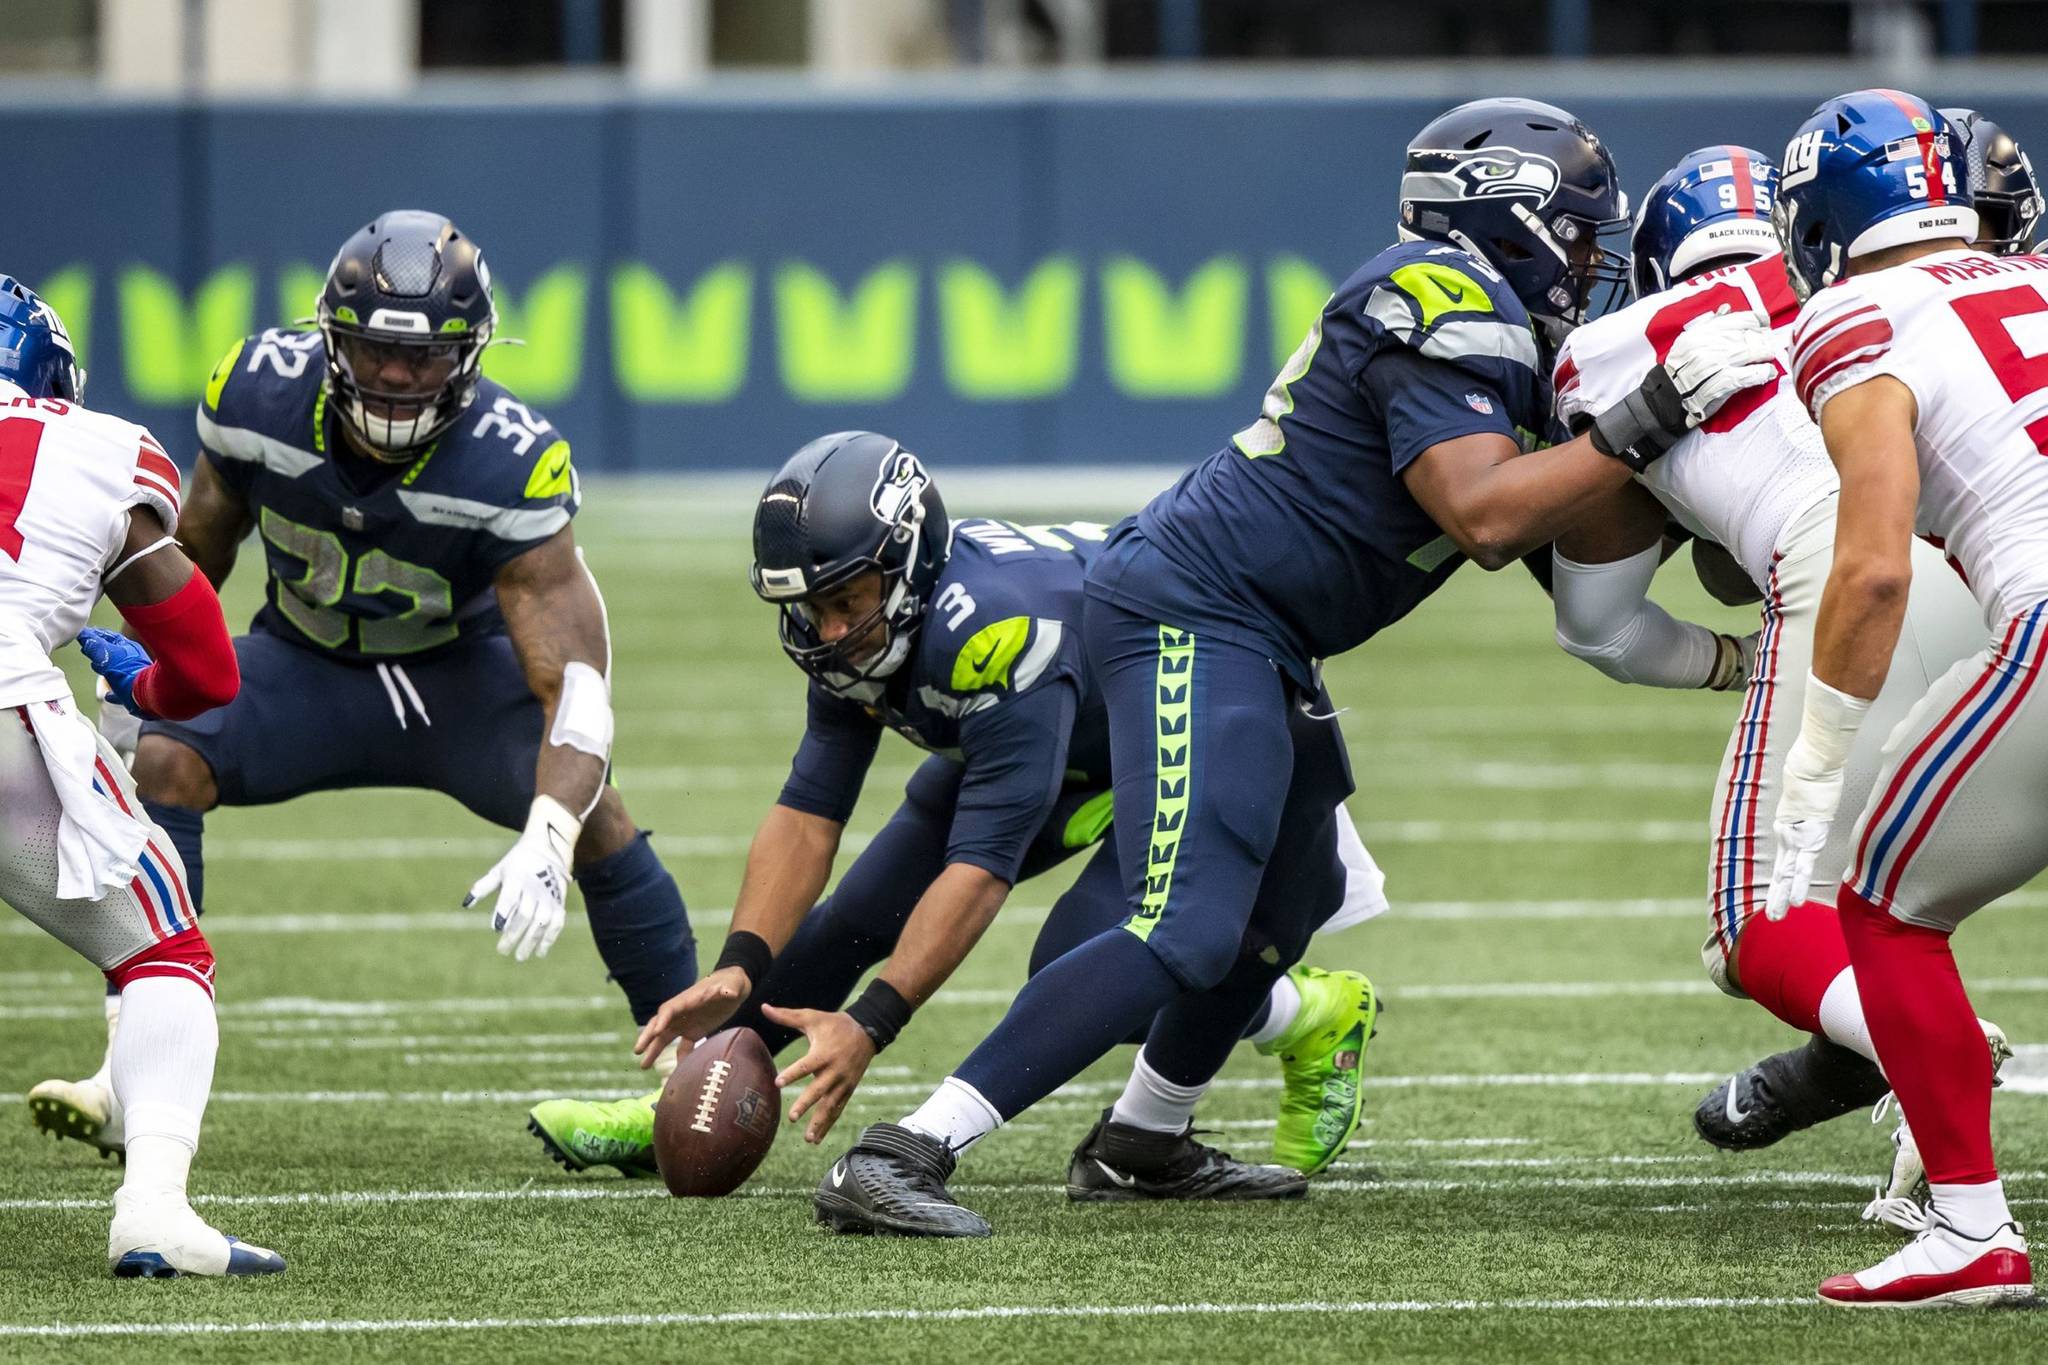 Bettina Hansen/The Seattle Times 
Seattle quarterback Russell Wilson fumbles the snap and the New York Giants recovered in the second quarter on Sunday at Lumen Field in Seattle.